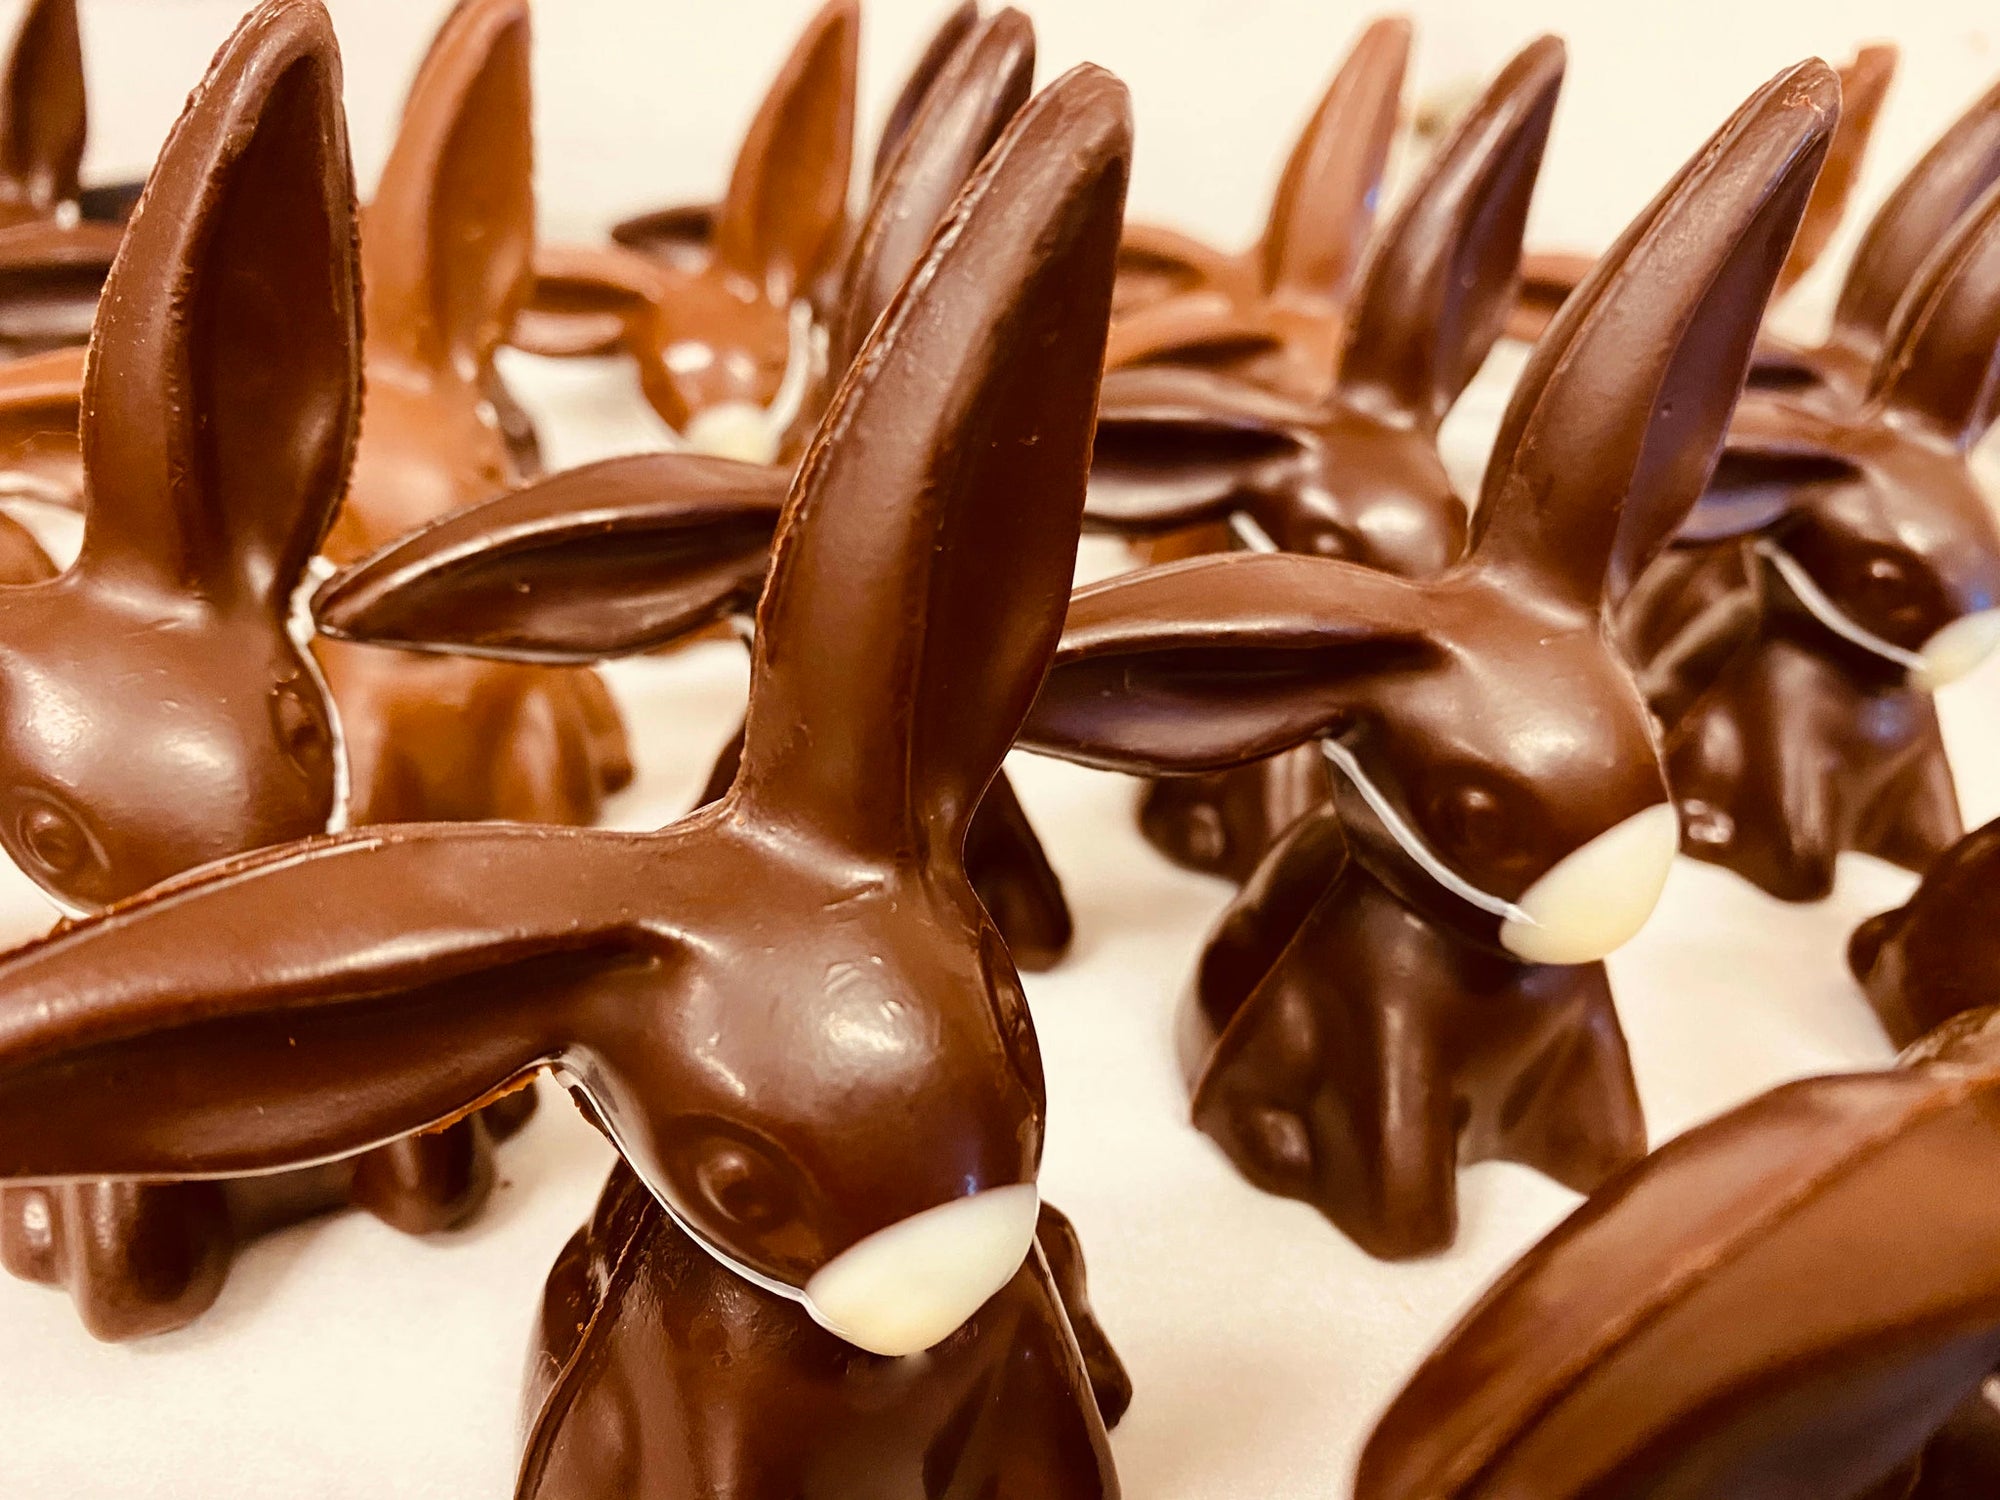 Picture of new solid chocolate Covid Bunnies, milk chocolate bunnies with white chocolate masks.